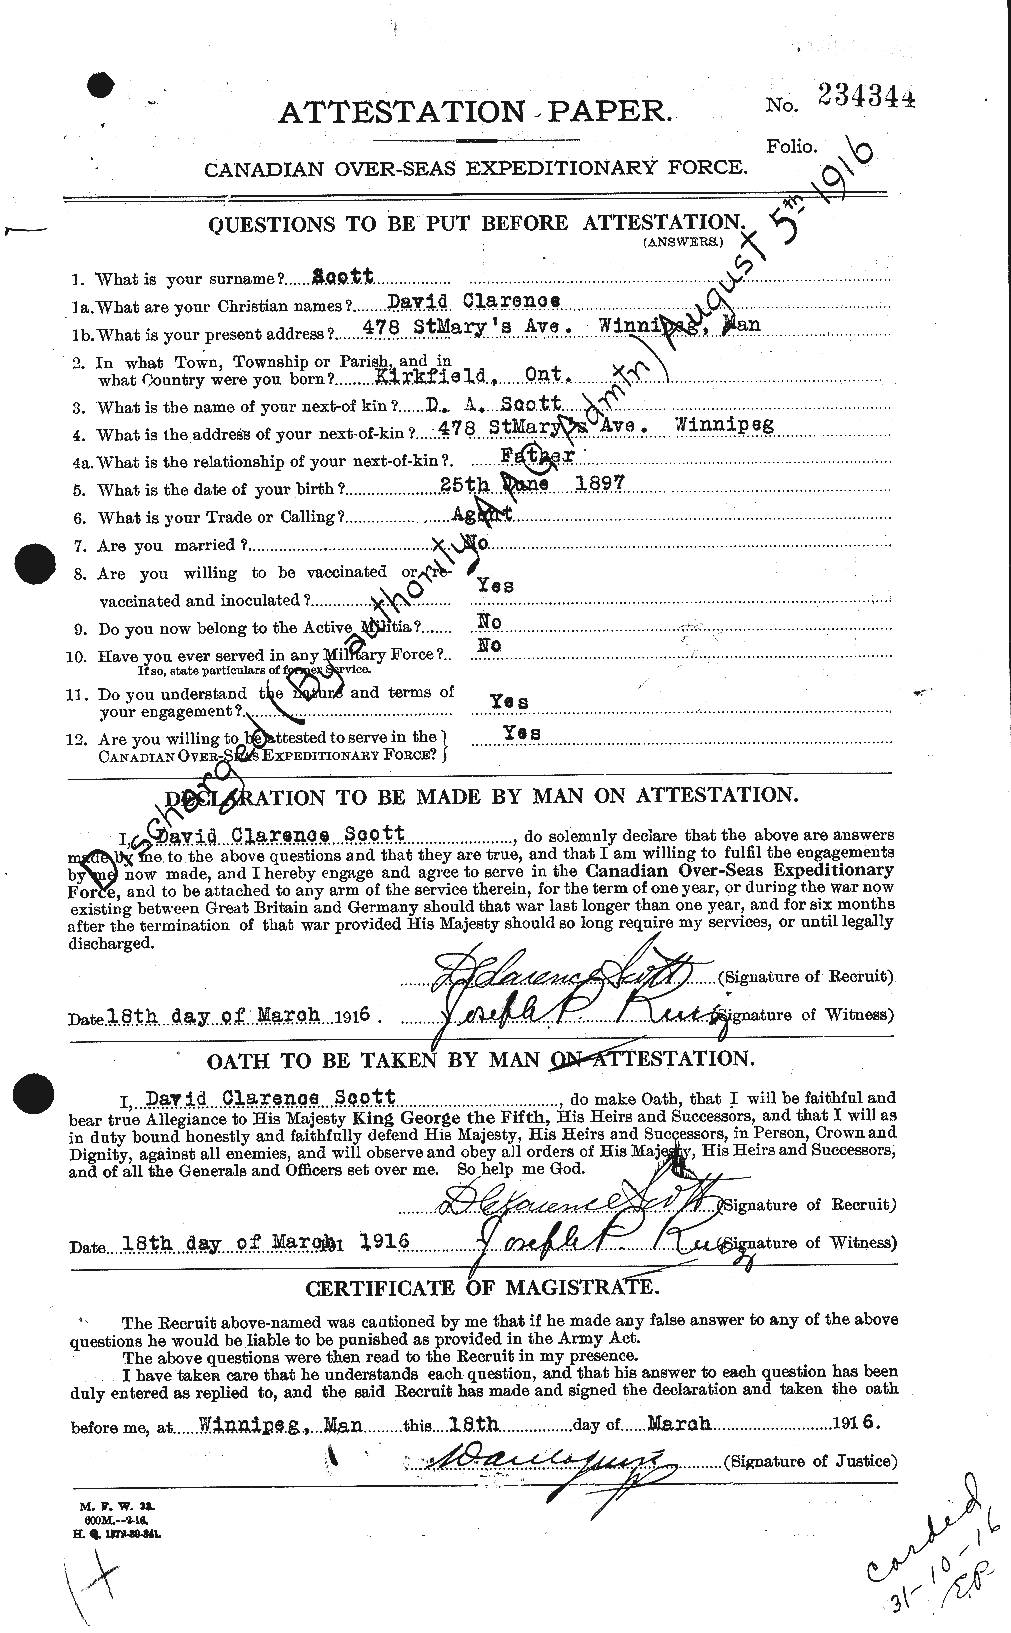 Personnel Records of the First World War - CEF 085600a